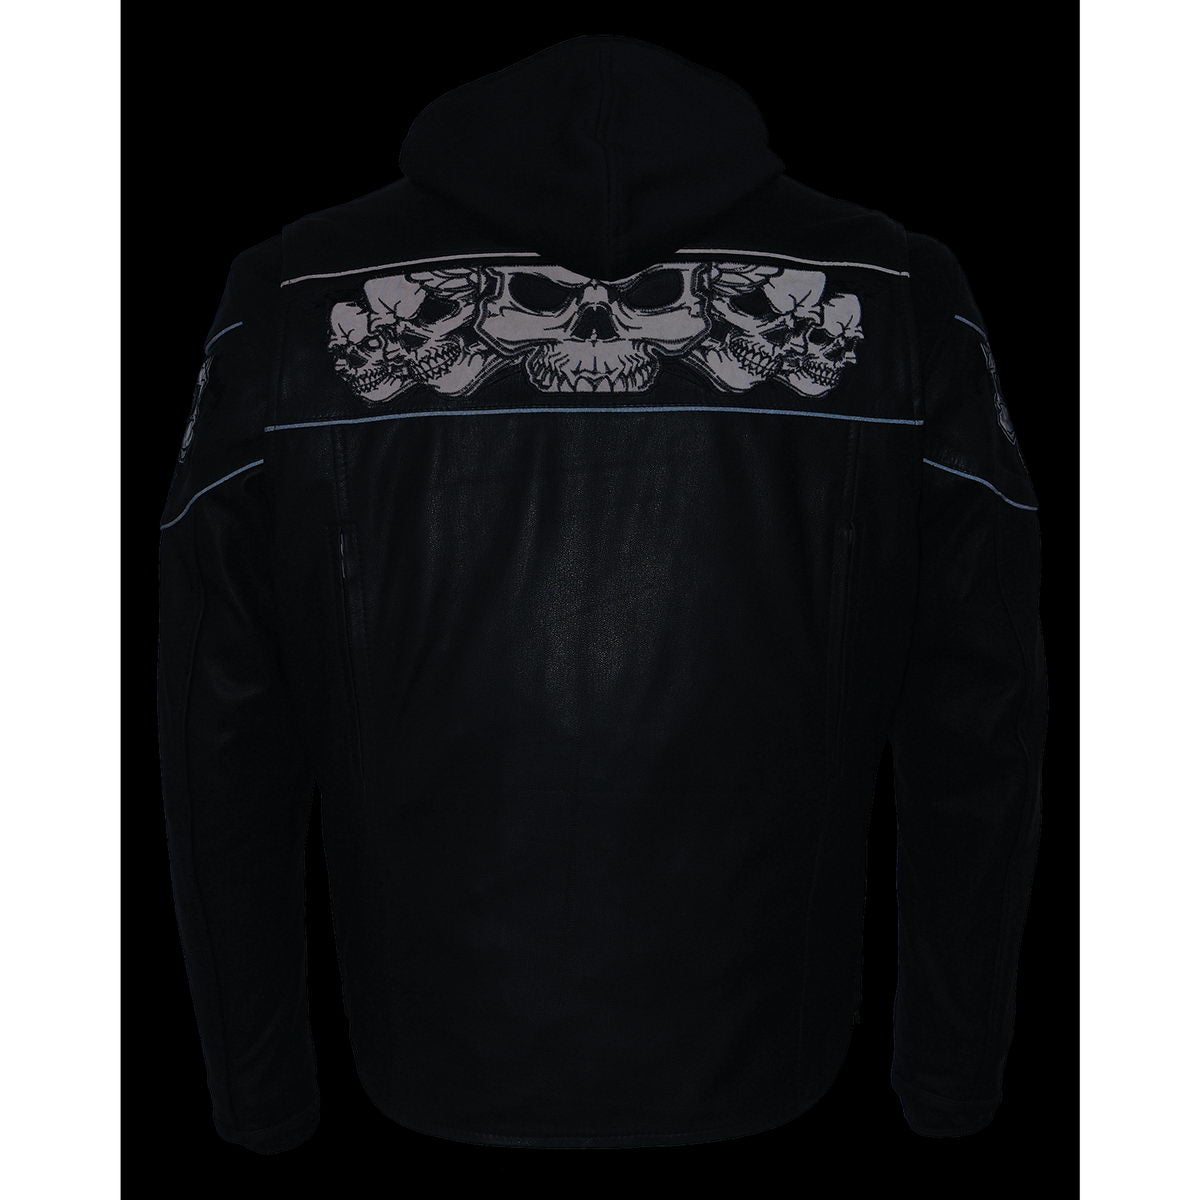 Milwaukee Leather MLM1563 Men's Black Leather Scooter Style Motorcycle Jacket with Reflective Skulls w/ Hoodie